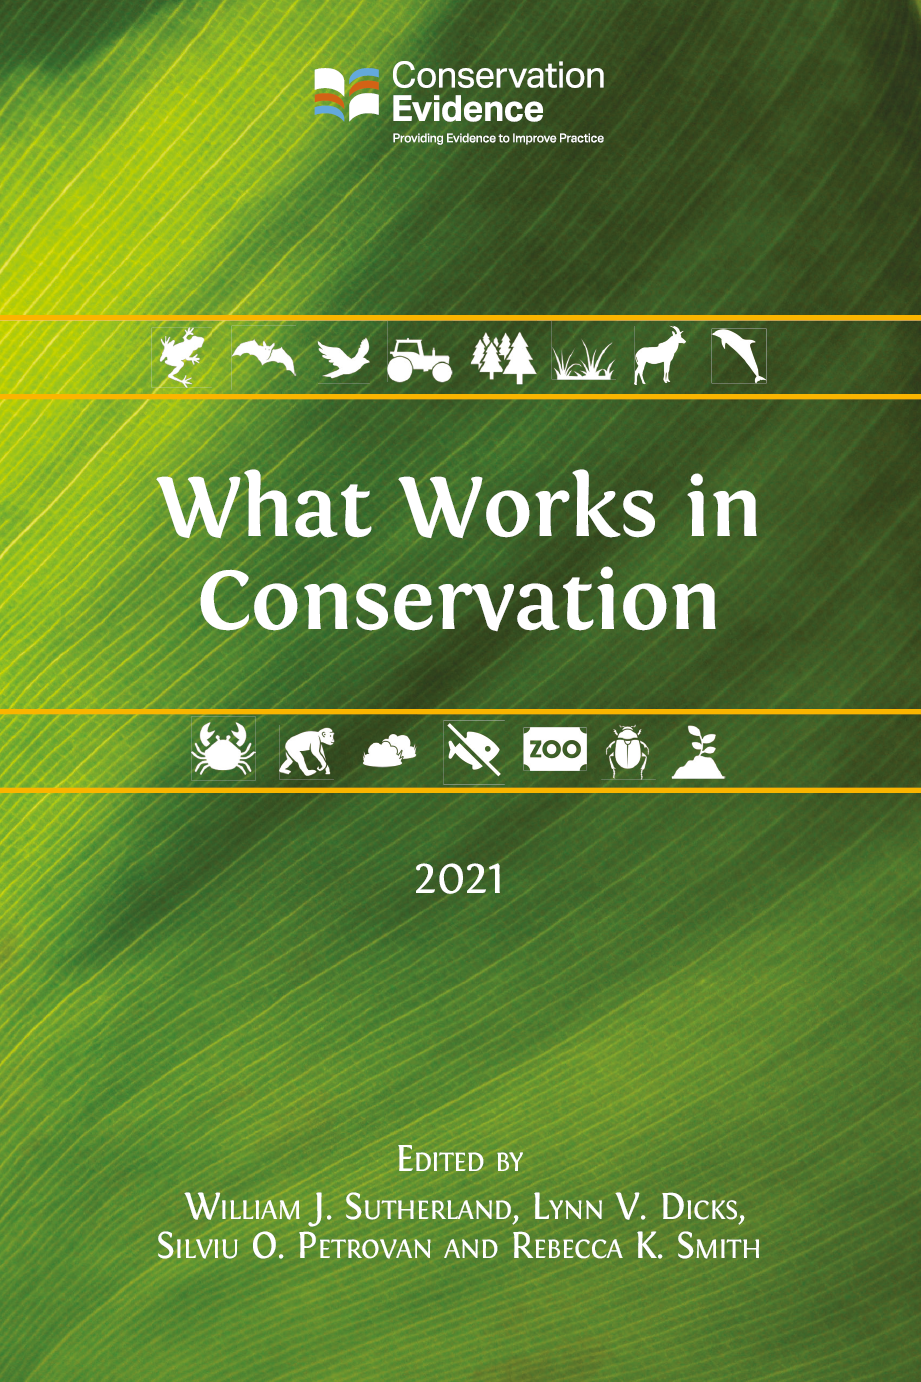 What Works in Conservation 2021 book cover image